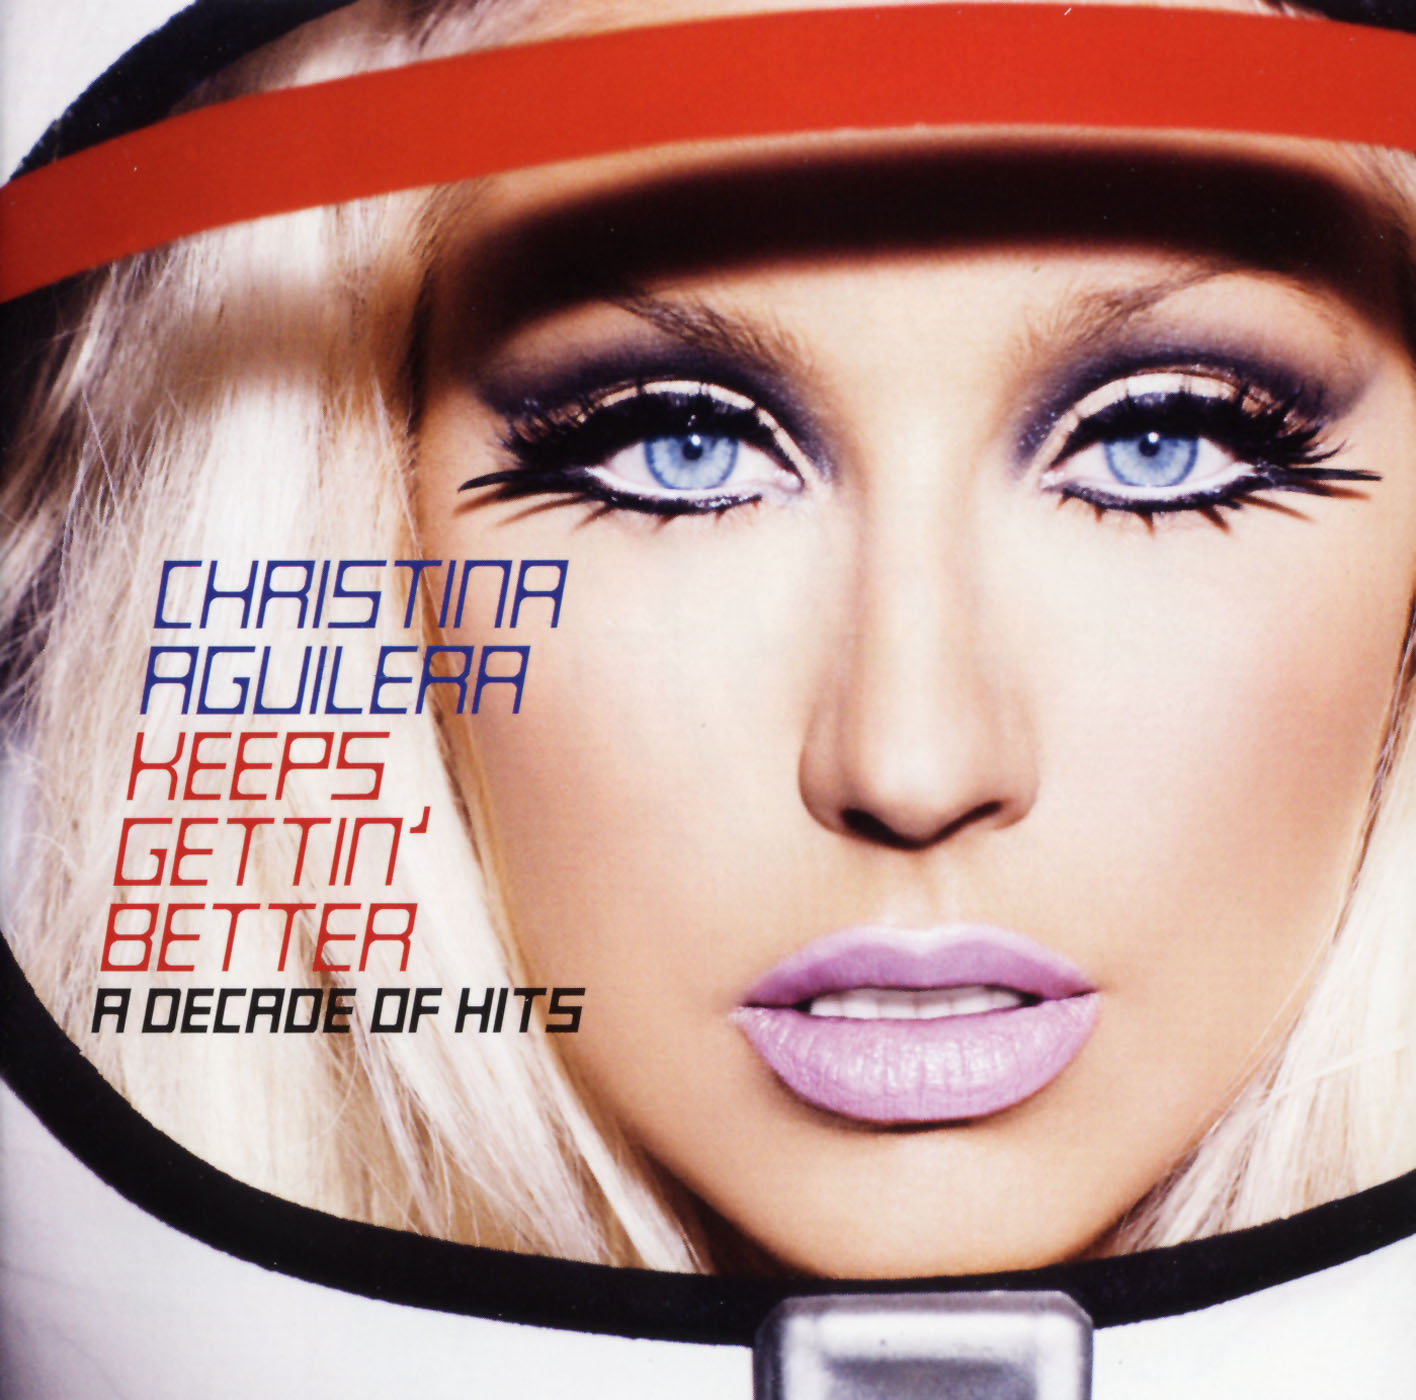 Keeps Gettin’ Better: A Decade Of Hits